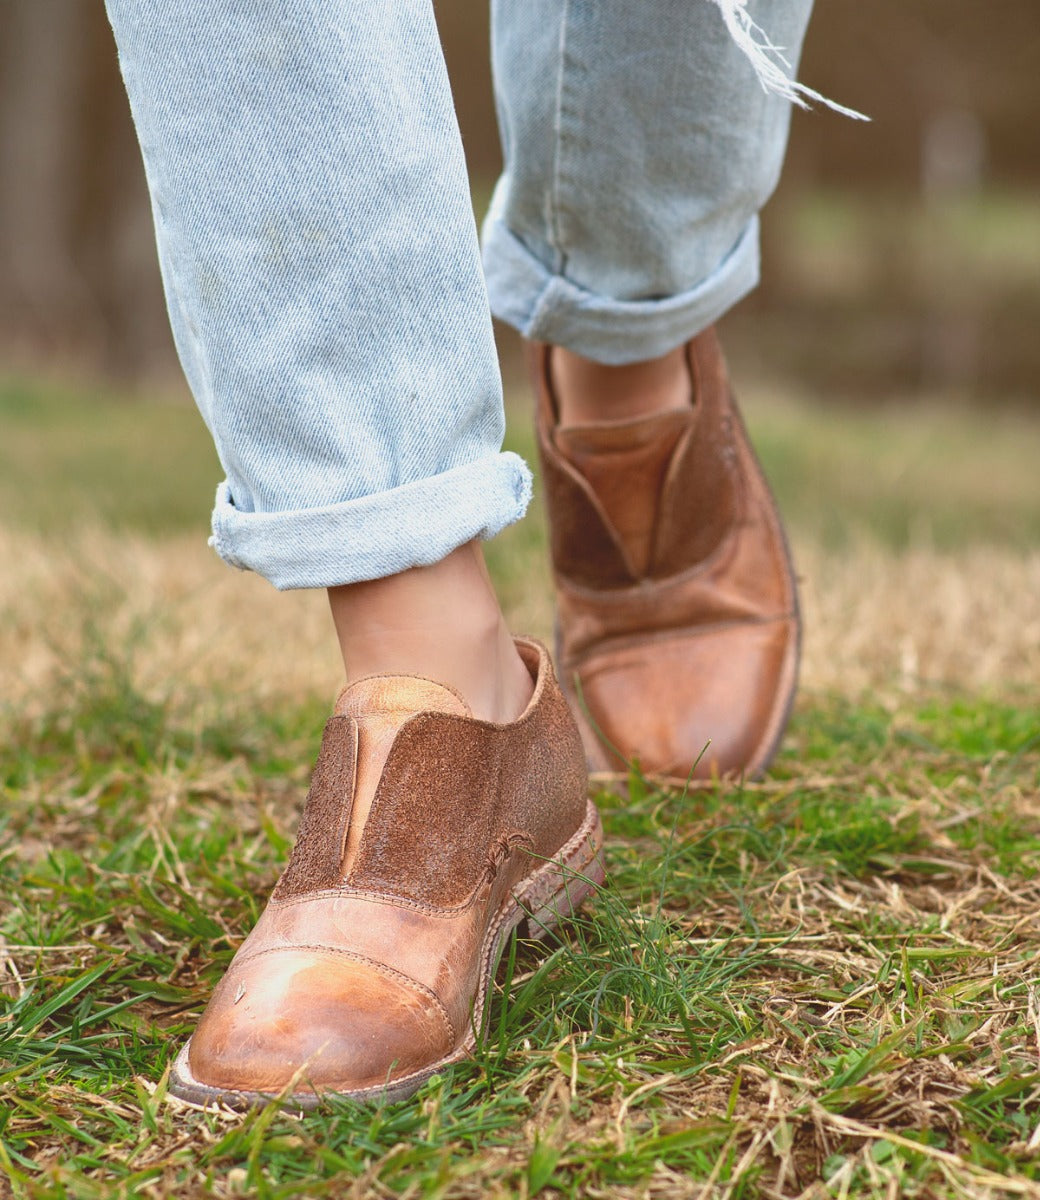 A woman wearing a pair of Bed Stu Rose shoes walking in the grass.